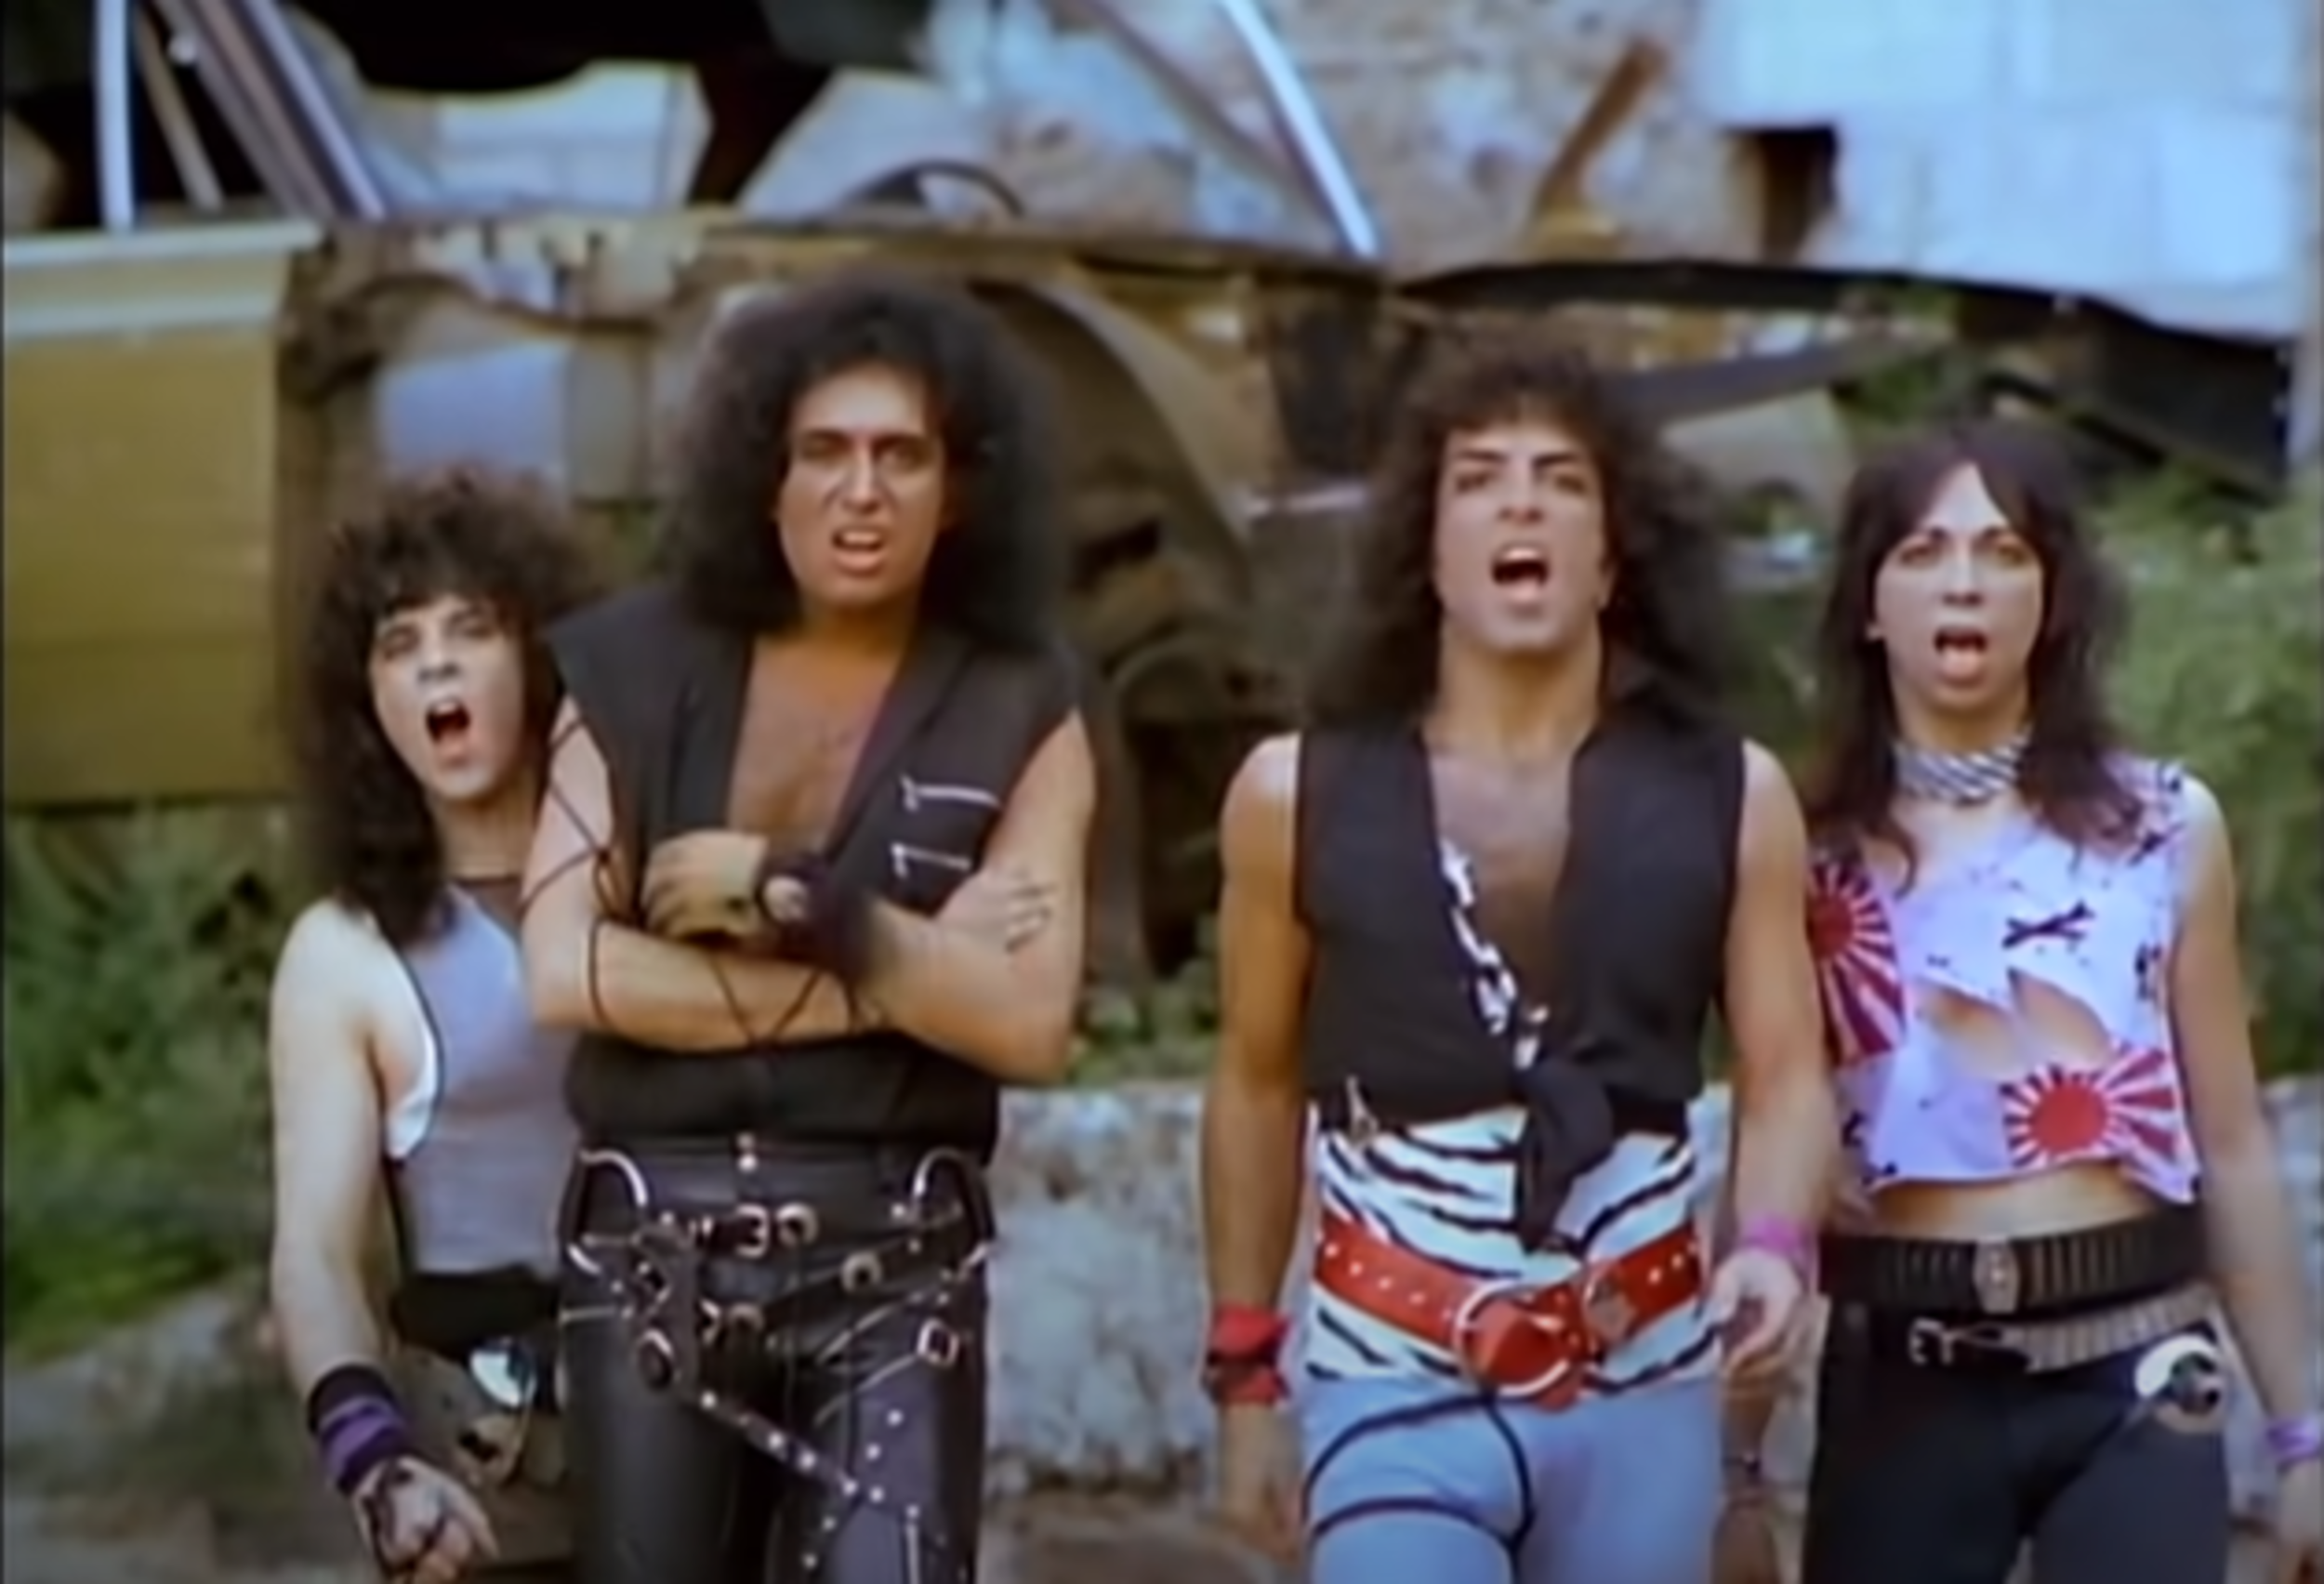 <p>Maybe it's not necessarily any new members who helped the Kiss resurgence of the early 1980s, though Eric Carr, Peter Criss' replacement on drums, seemed to breathe new life into Gene Simmons and Paul Stanley. When the makeup came off for 1993's platinum-selling<a href="https://www.youtube.com/watch?v=Gcj34XixuYg"> <em>Lick It Up</em>,</a> the group had essentially shed the glam rock/late-era disco sound for something that<a href="https://www.youtube.com/watch?v=HshQidqYxjg"> fit well on MTV and within the hair metal movement</a>. That pop-metal sound continued in earnest with the addition of Bruce Kulick on guitar.</p>